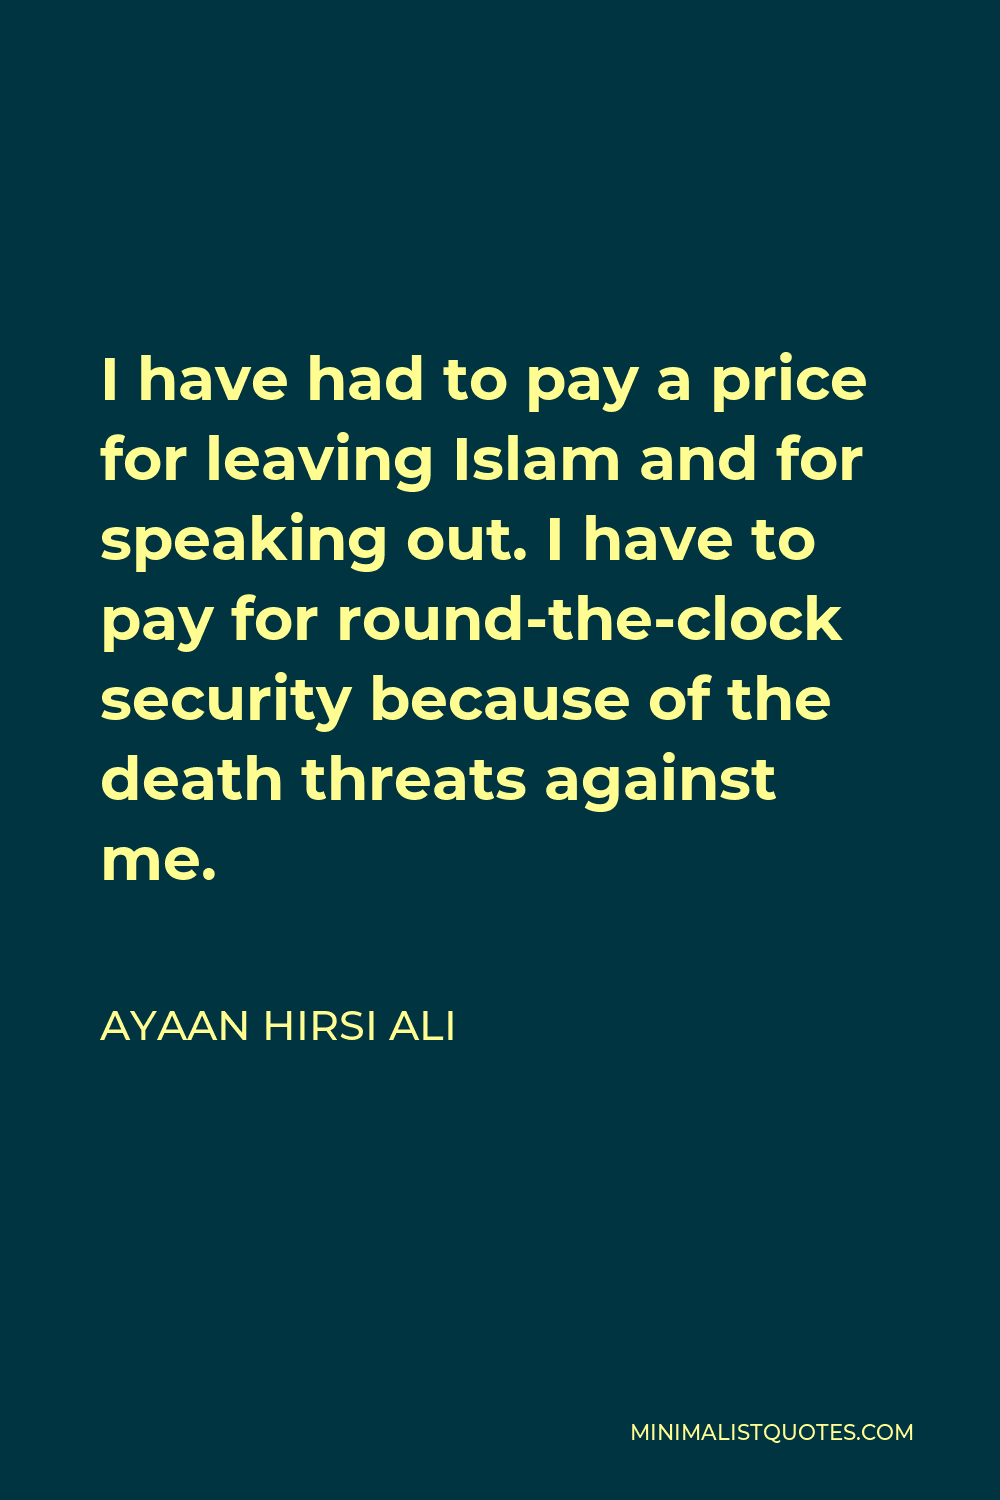 Ayaan Hirsi Ali Quote - I have had to pay a price for leaving Islam and for speaking out. I have to pay for round-the-clock security because of the death threats against me.